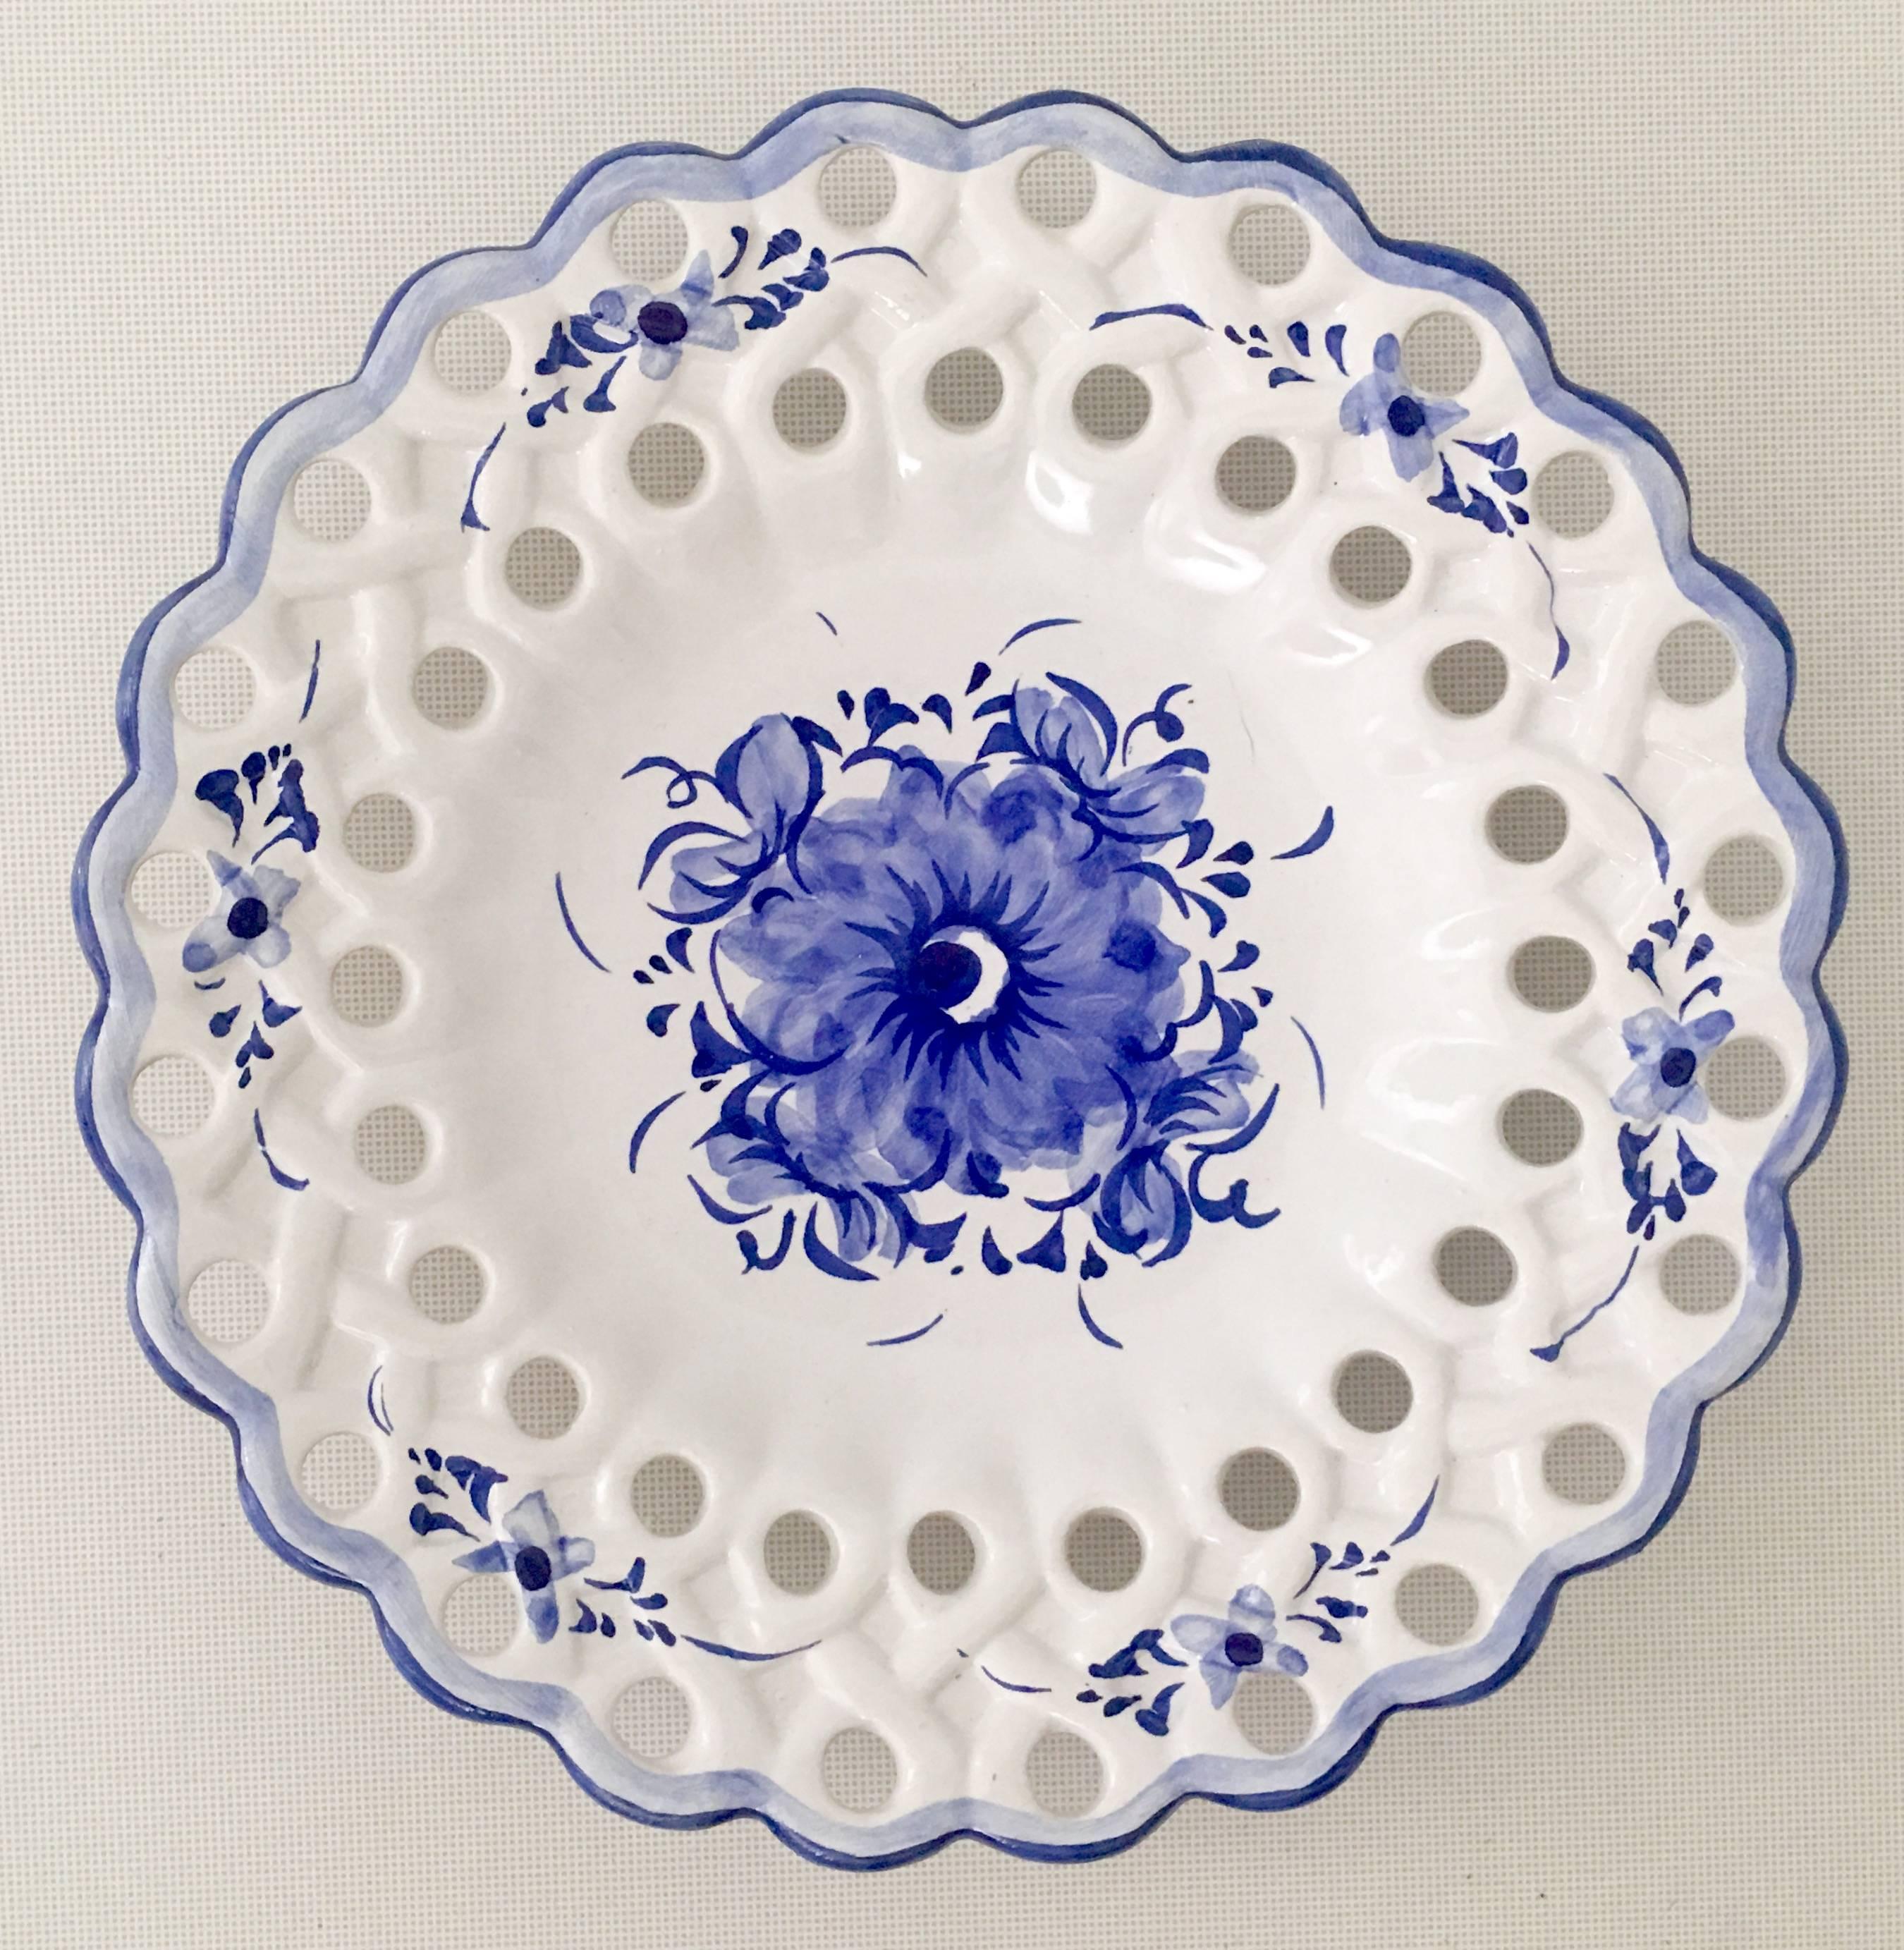 A rare set of three Vestal Alcobaca hand-painted blue and white pottery hanging wall plates. These hand-painted round plates feature a blue and white floral motif, with a reticulated and scalloped edge. Each plate had existing wire for hanging. The